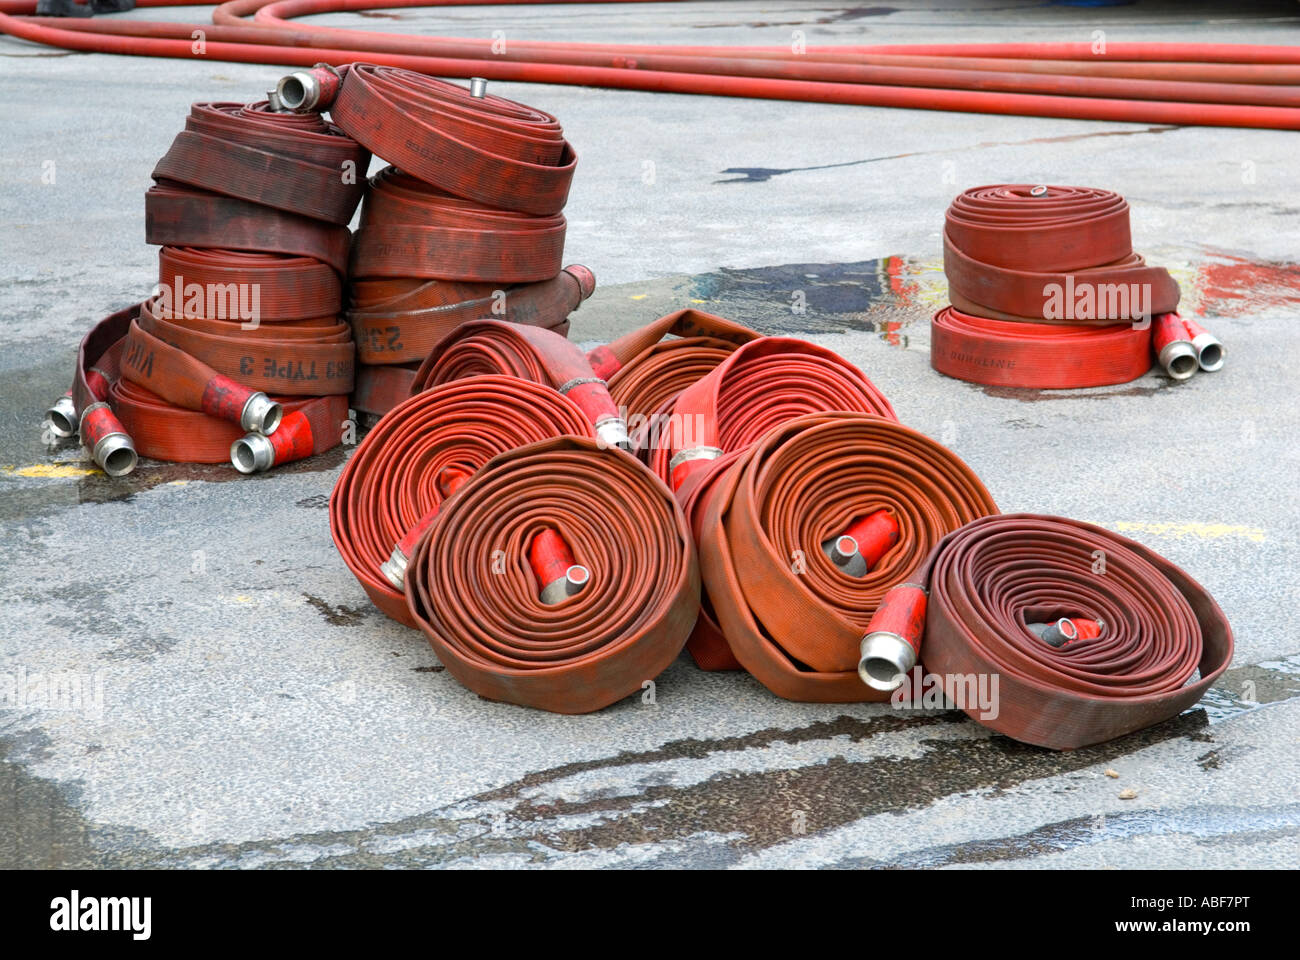 Fire hose lengths stacked up coiled and in use at a large fire in North West UK Stock Photo